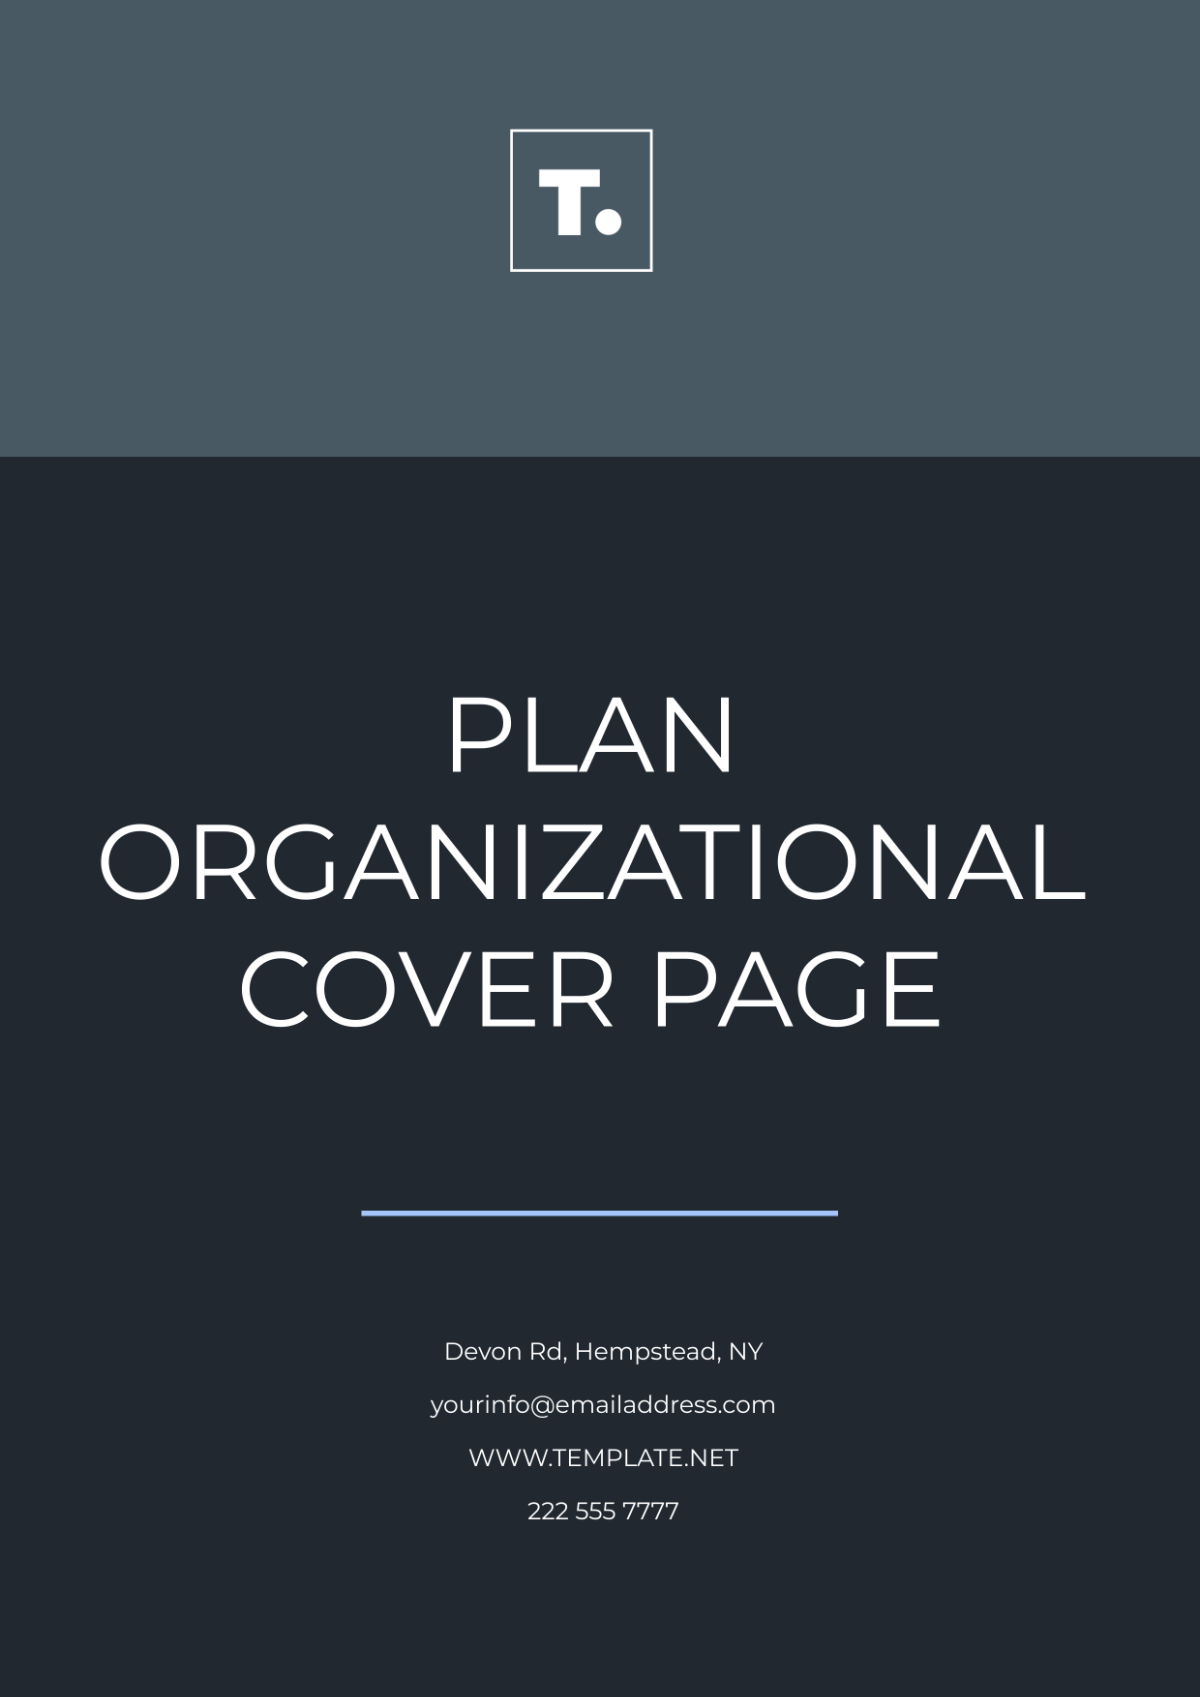 Plan Organizational Cover Page